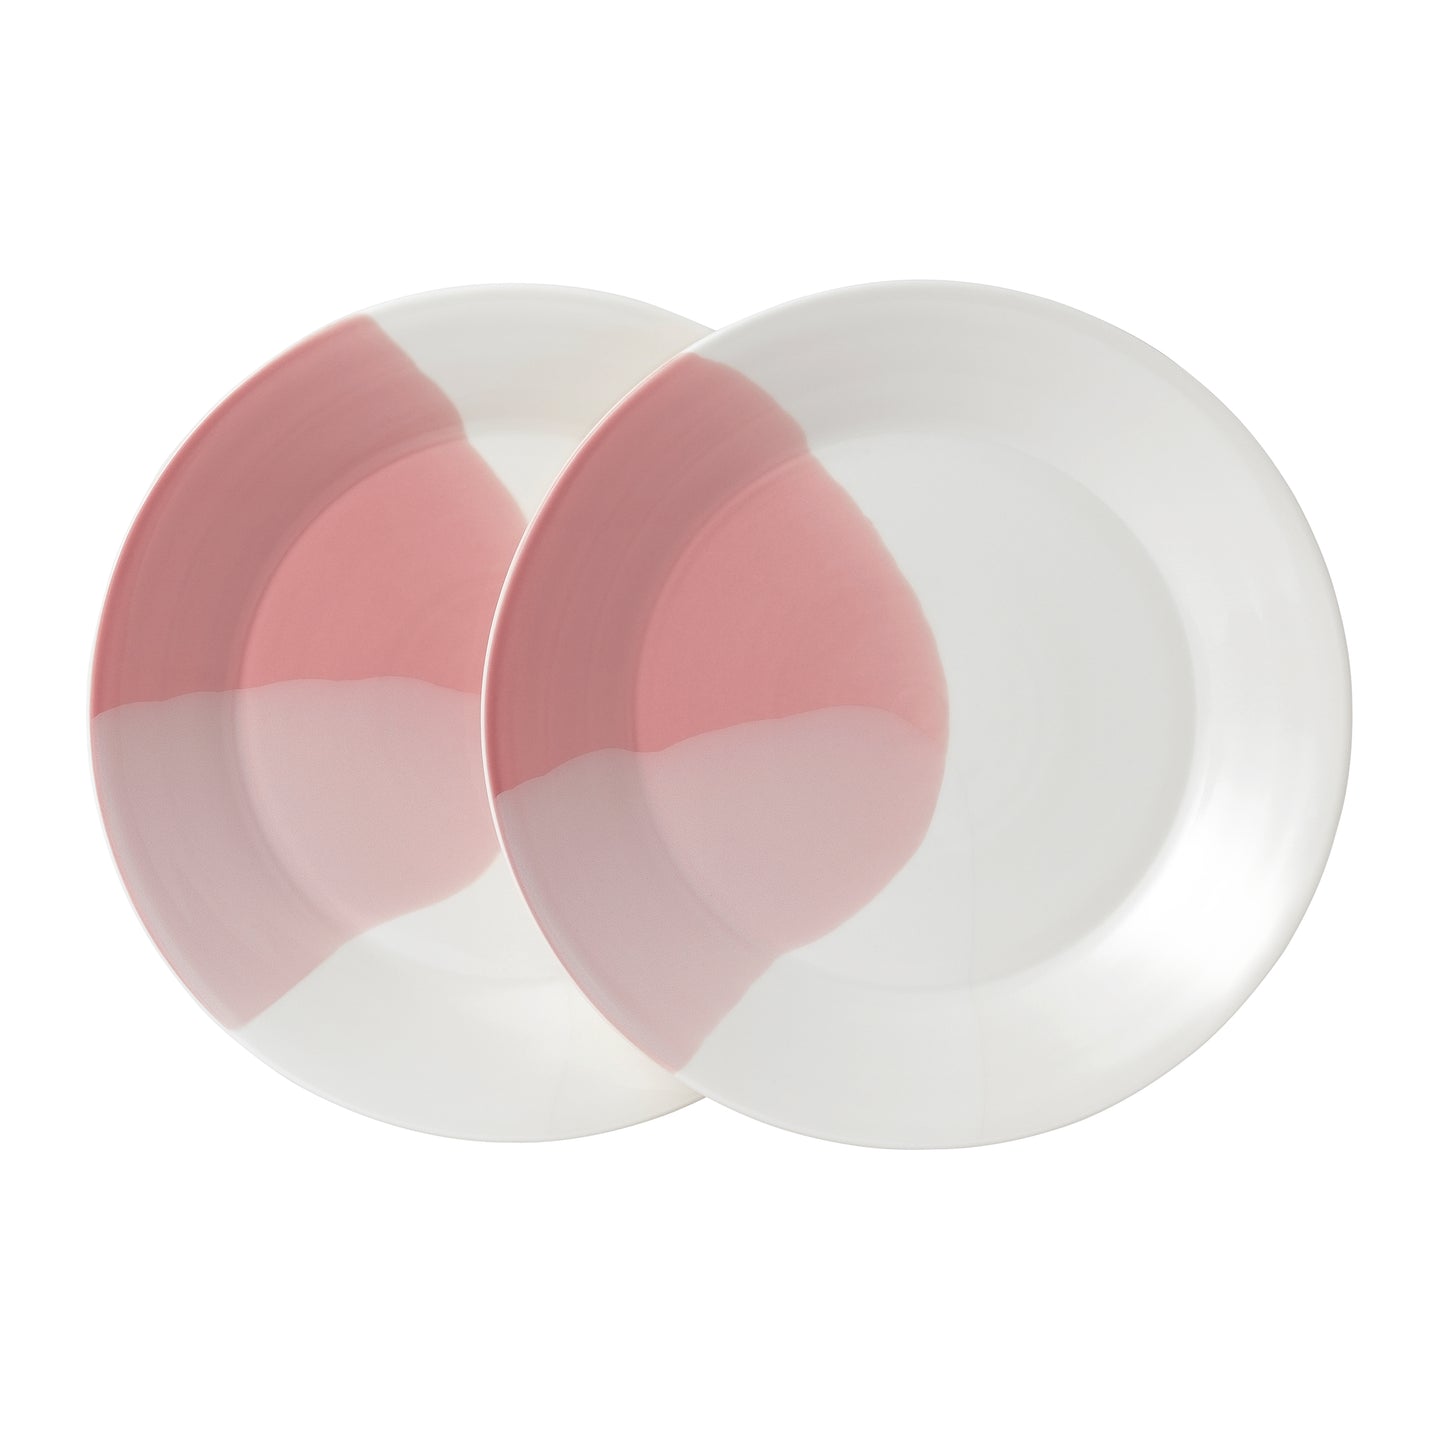 Royal Doulton Signature 1815 Coral Side Plate (Set of 2)